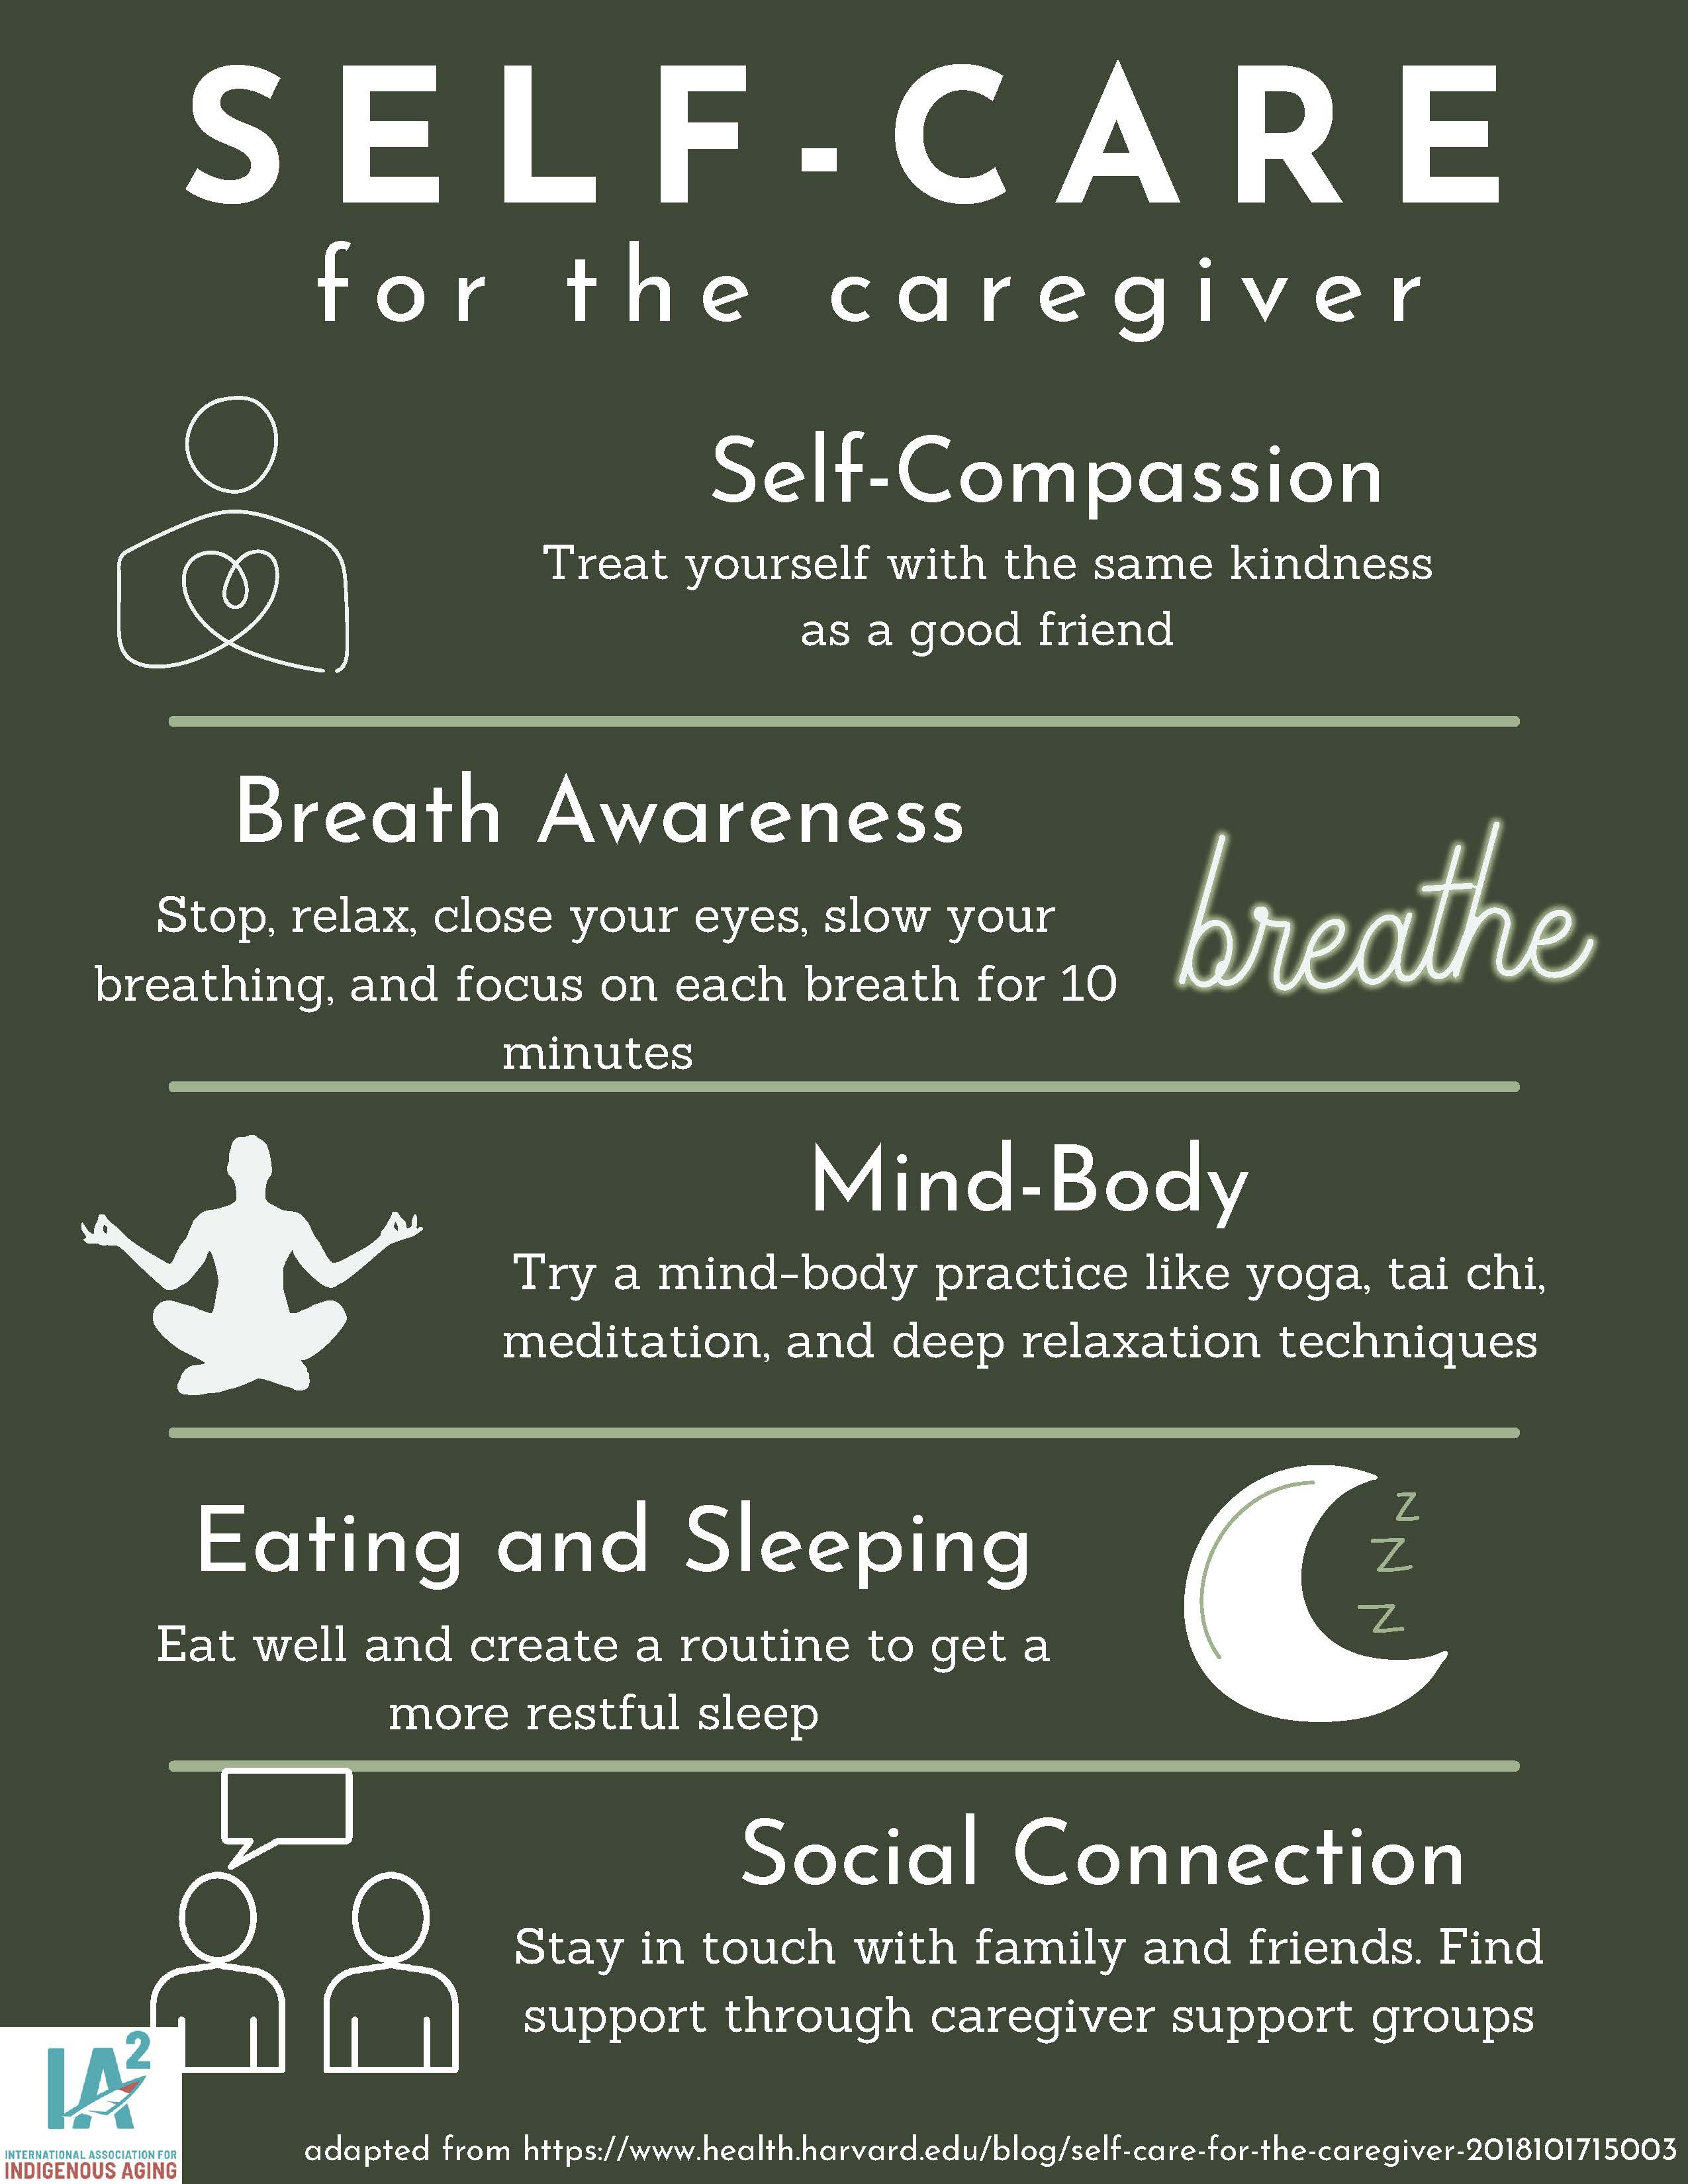 Promoting self-care in aging